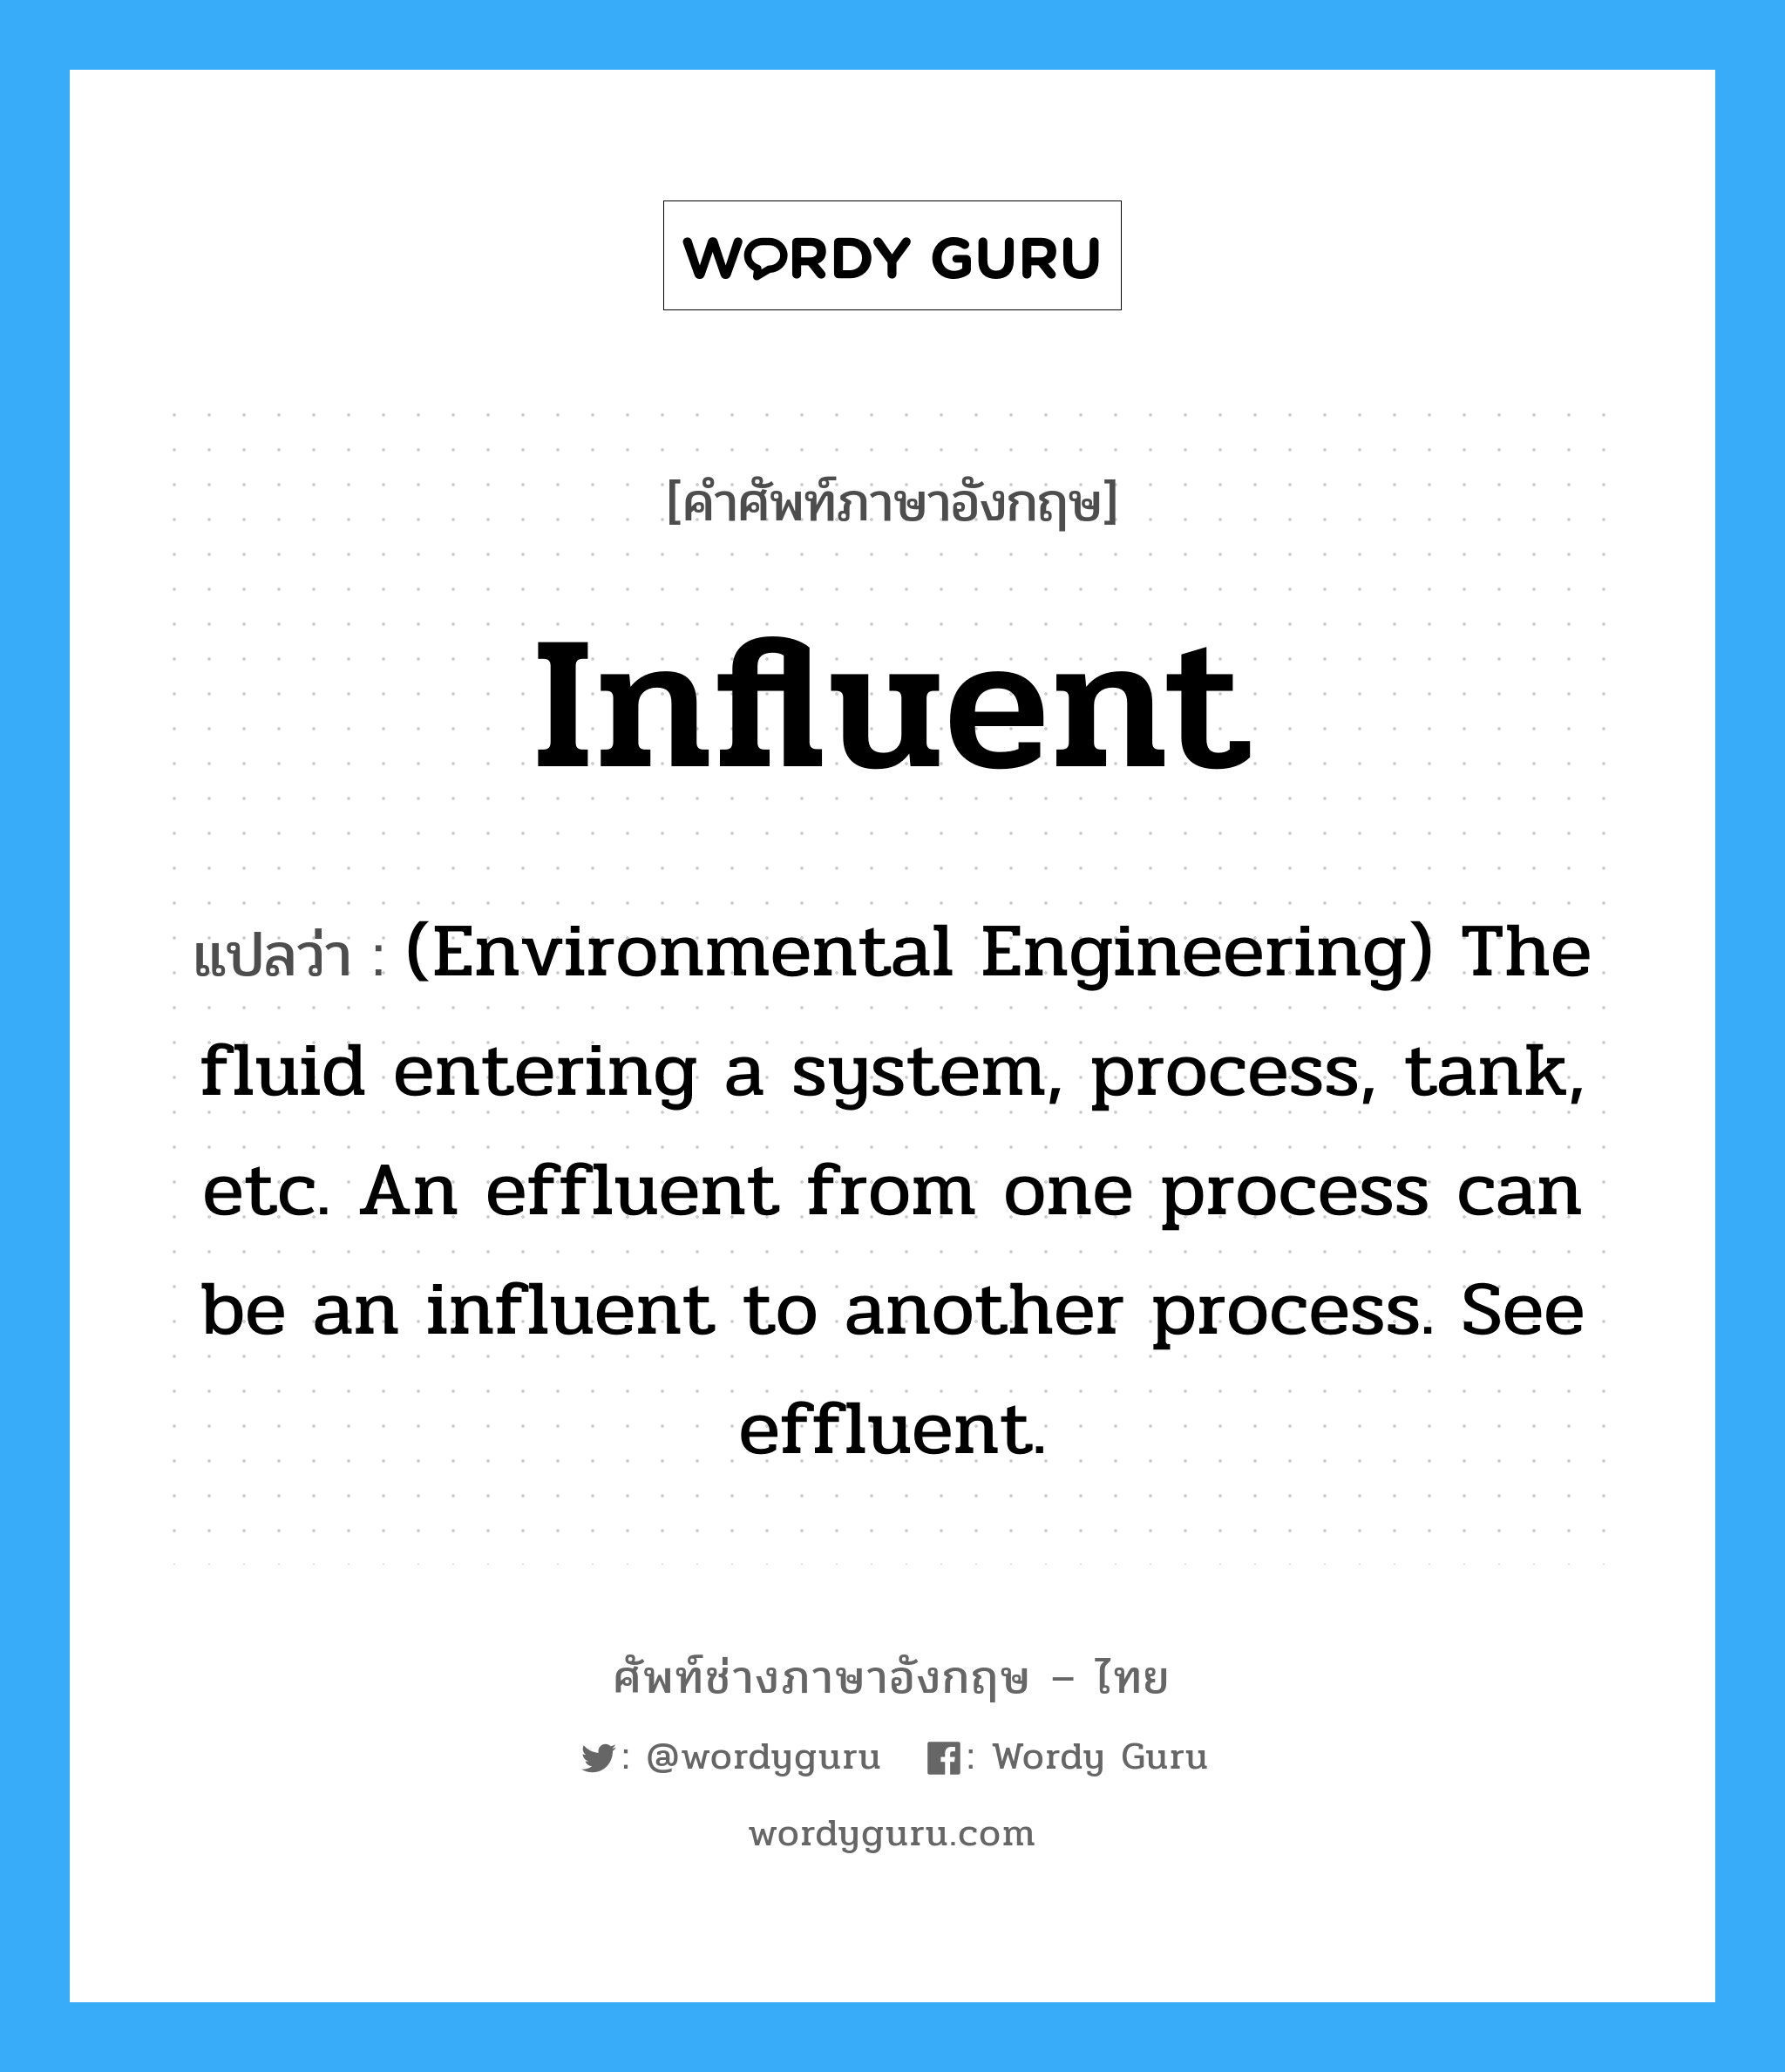 (Environmental Engineering) The fluid entering a system, process, tank, etc. An effluent from one process can be an influent to another process. See effluent. ภาษาอังกฤษ?, คำศัพท์ช่างภาษาอังกฤษ - ไทย (Environmental Engineering) The fluid entering a system, process, tank, etc. An effluent from one process can be an influent to another process. See effluent. คำศัพท์ภาษาอังกฤษ (Environmental Engineering) The fluid entering a system, process, tank, etc. An effluent from one process can be an influent to another process. See effluent. แปลว่า Influent